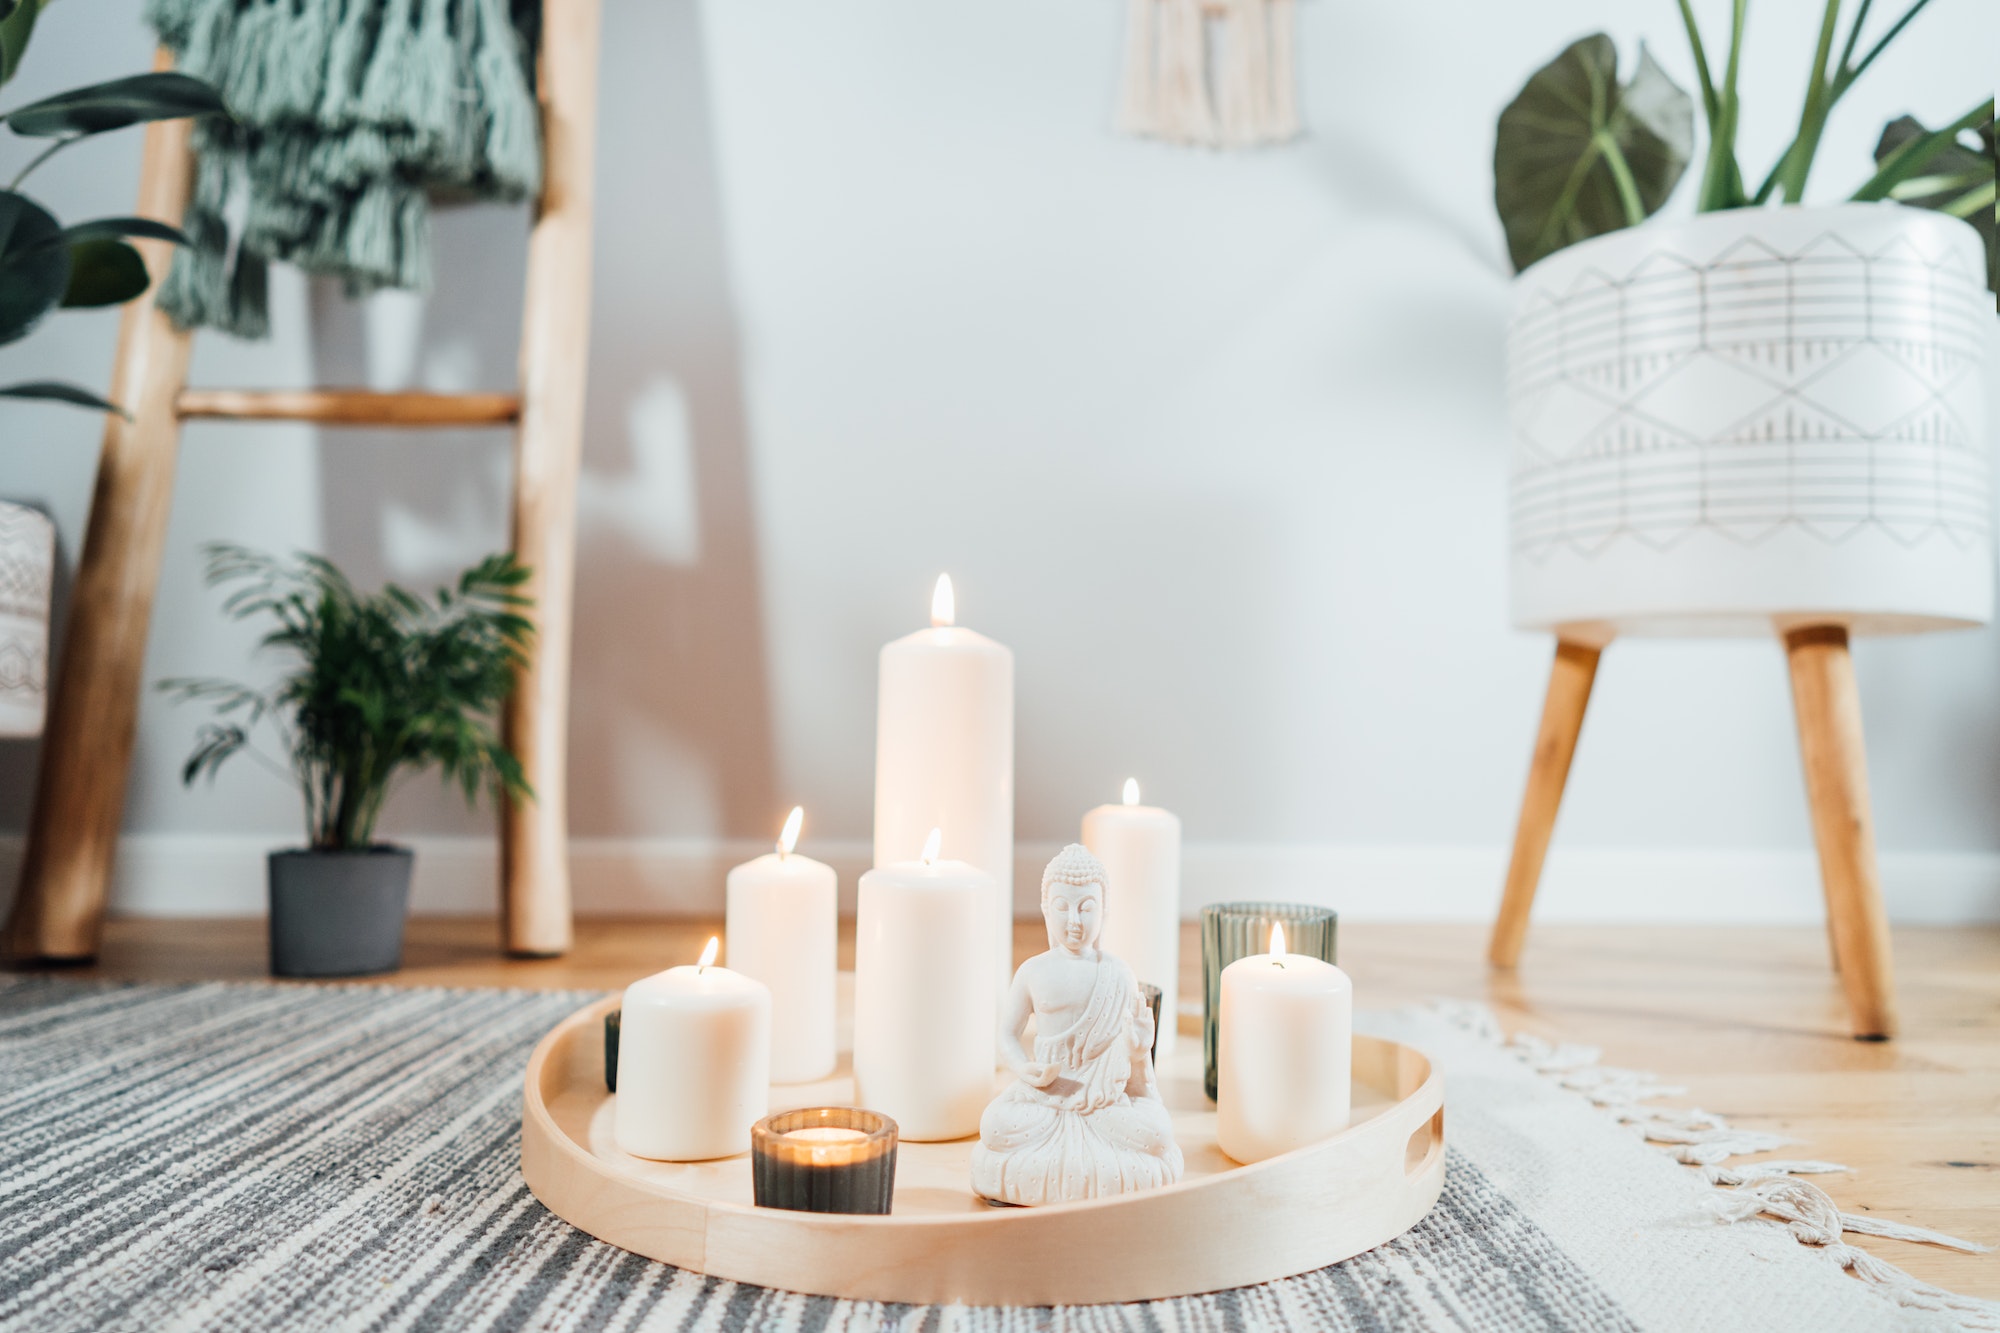 Using Feng Shui to bring positivity to your home